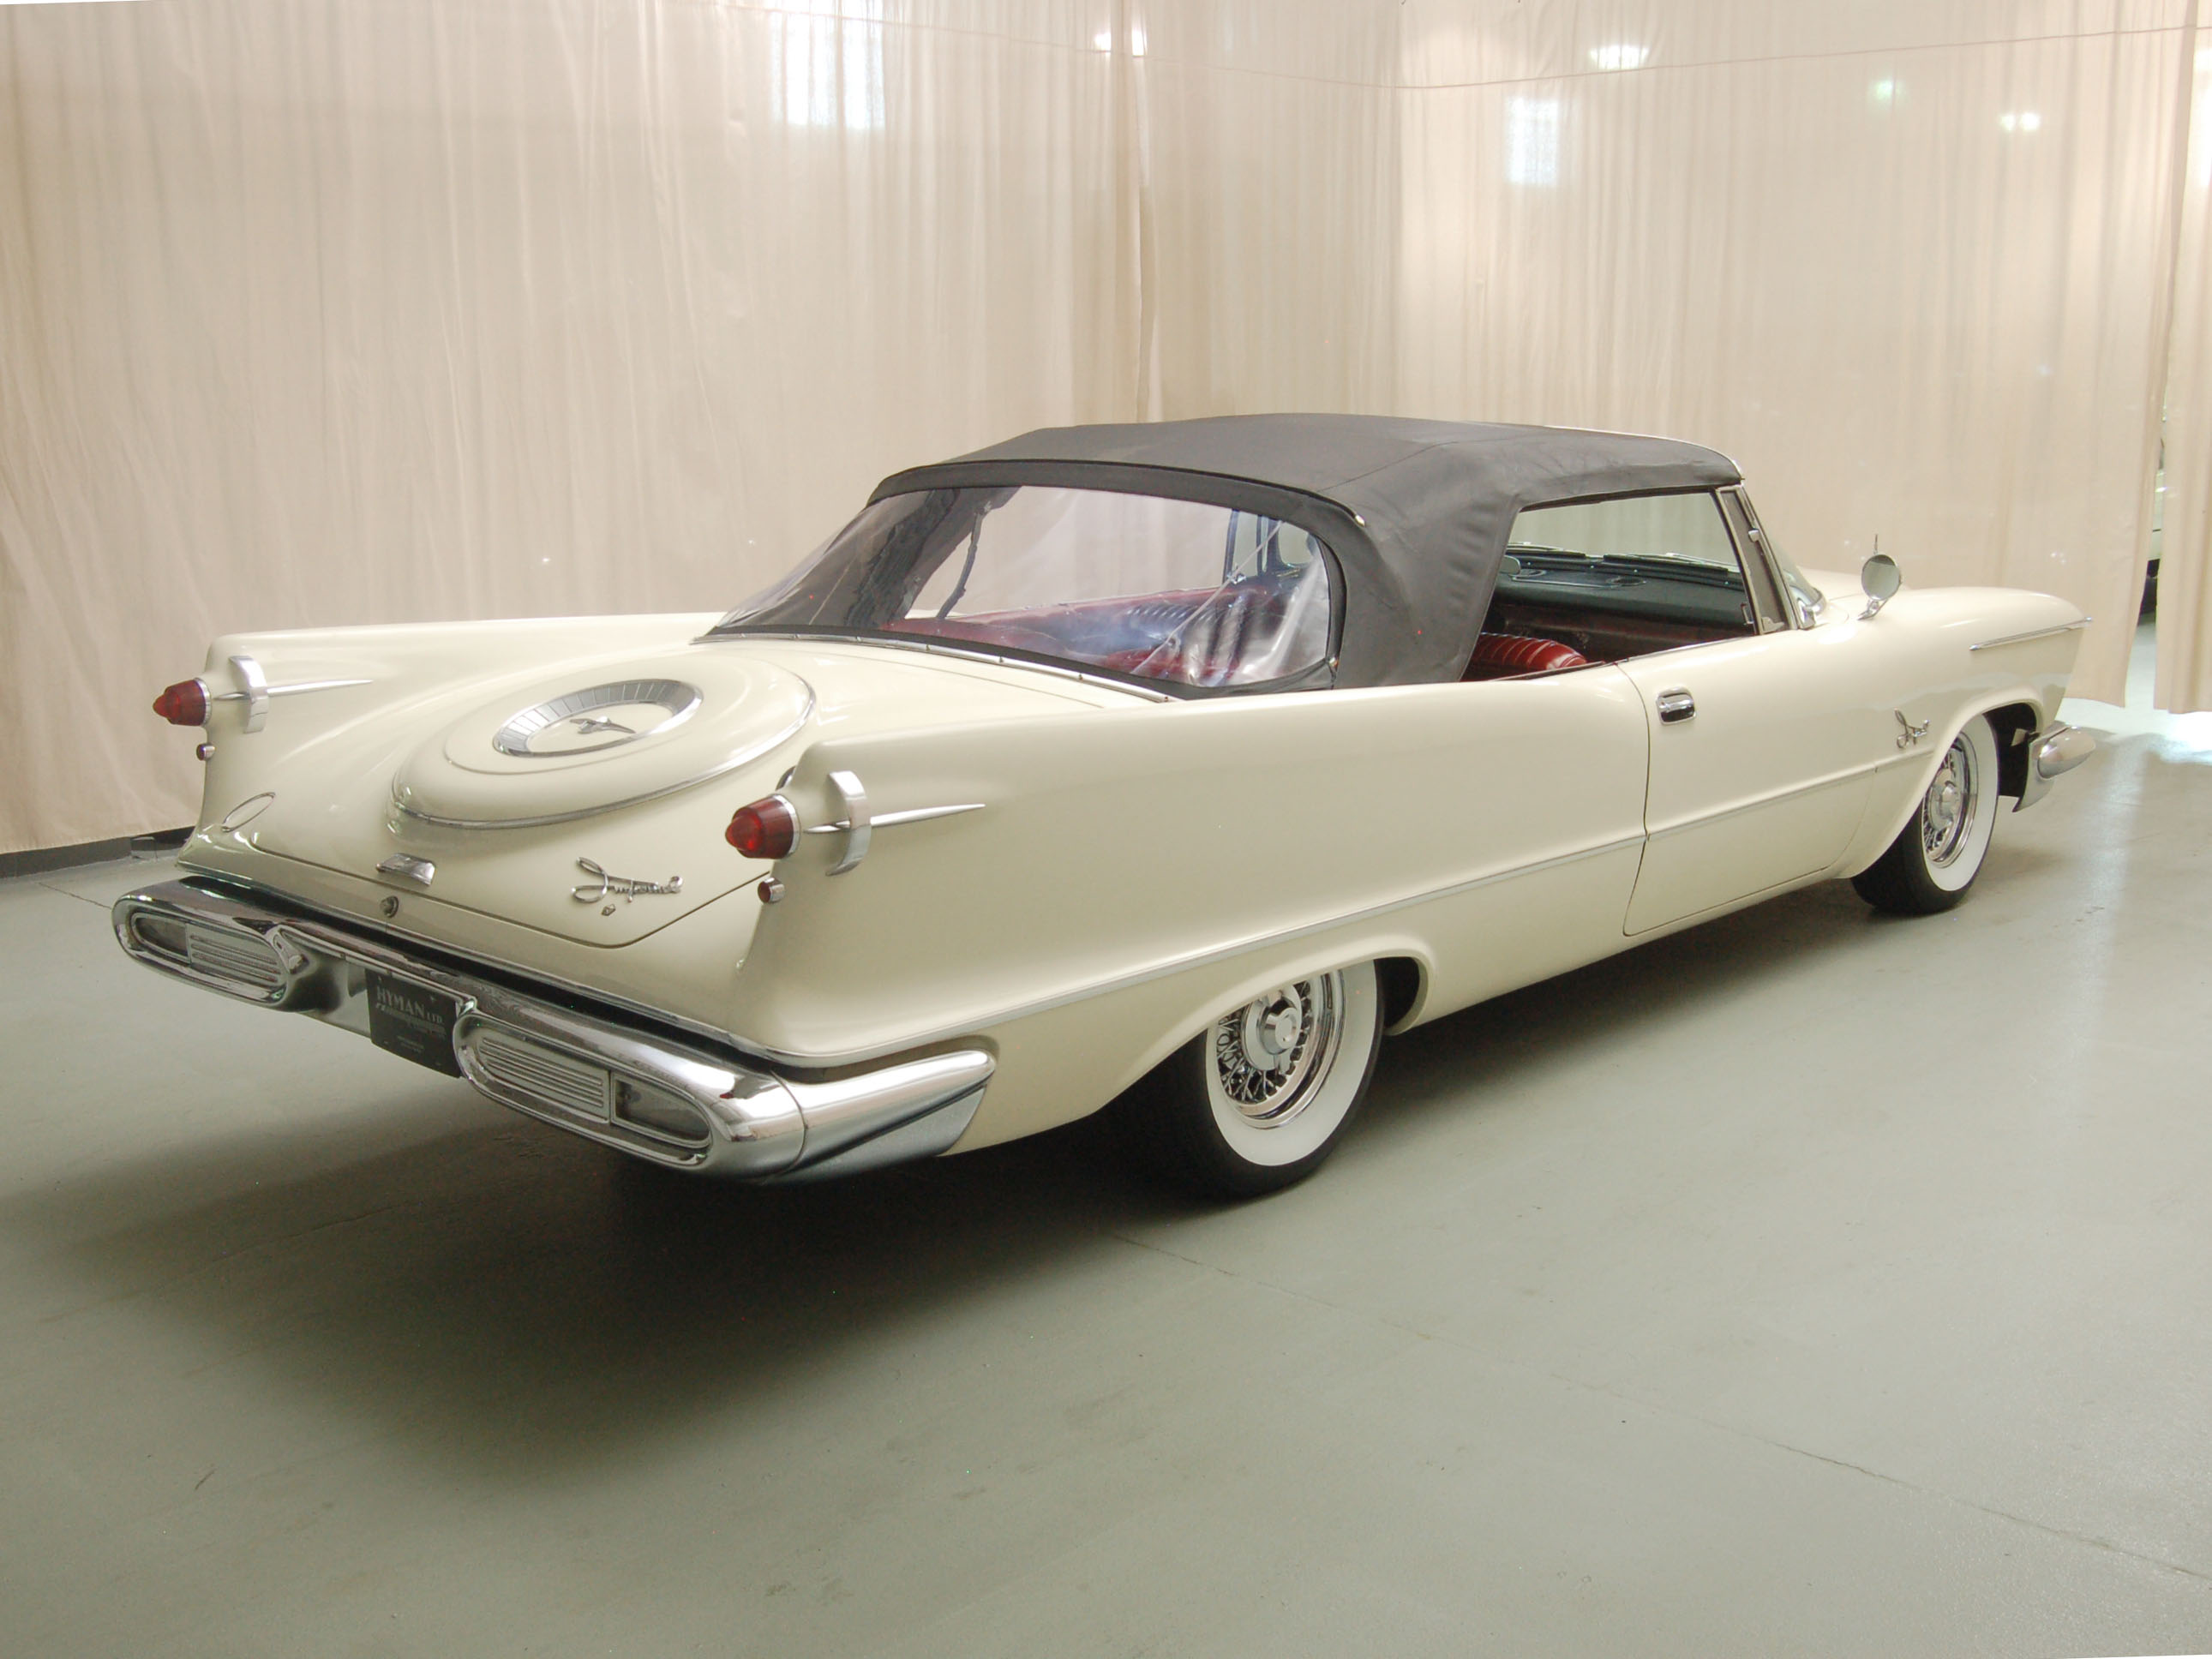 1959 imperial imperial lebaron